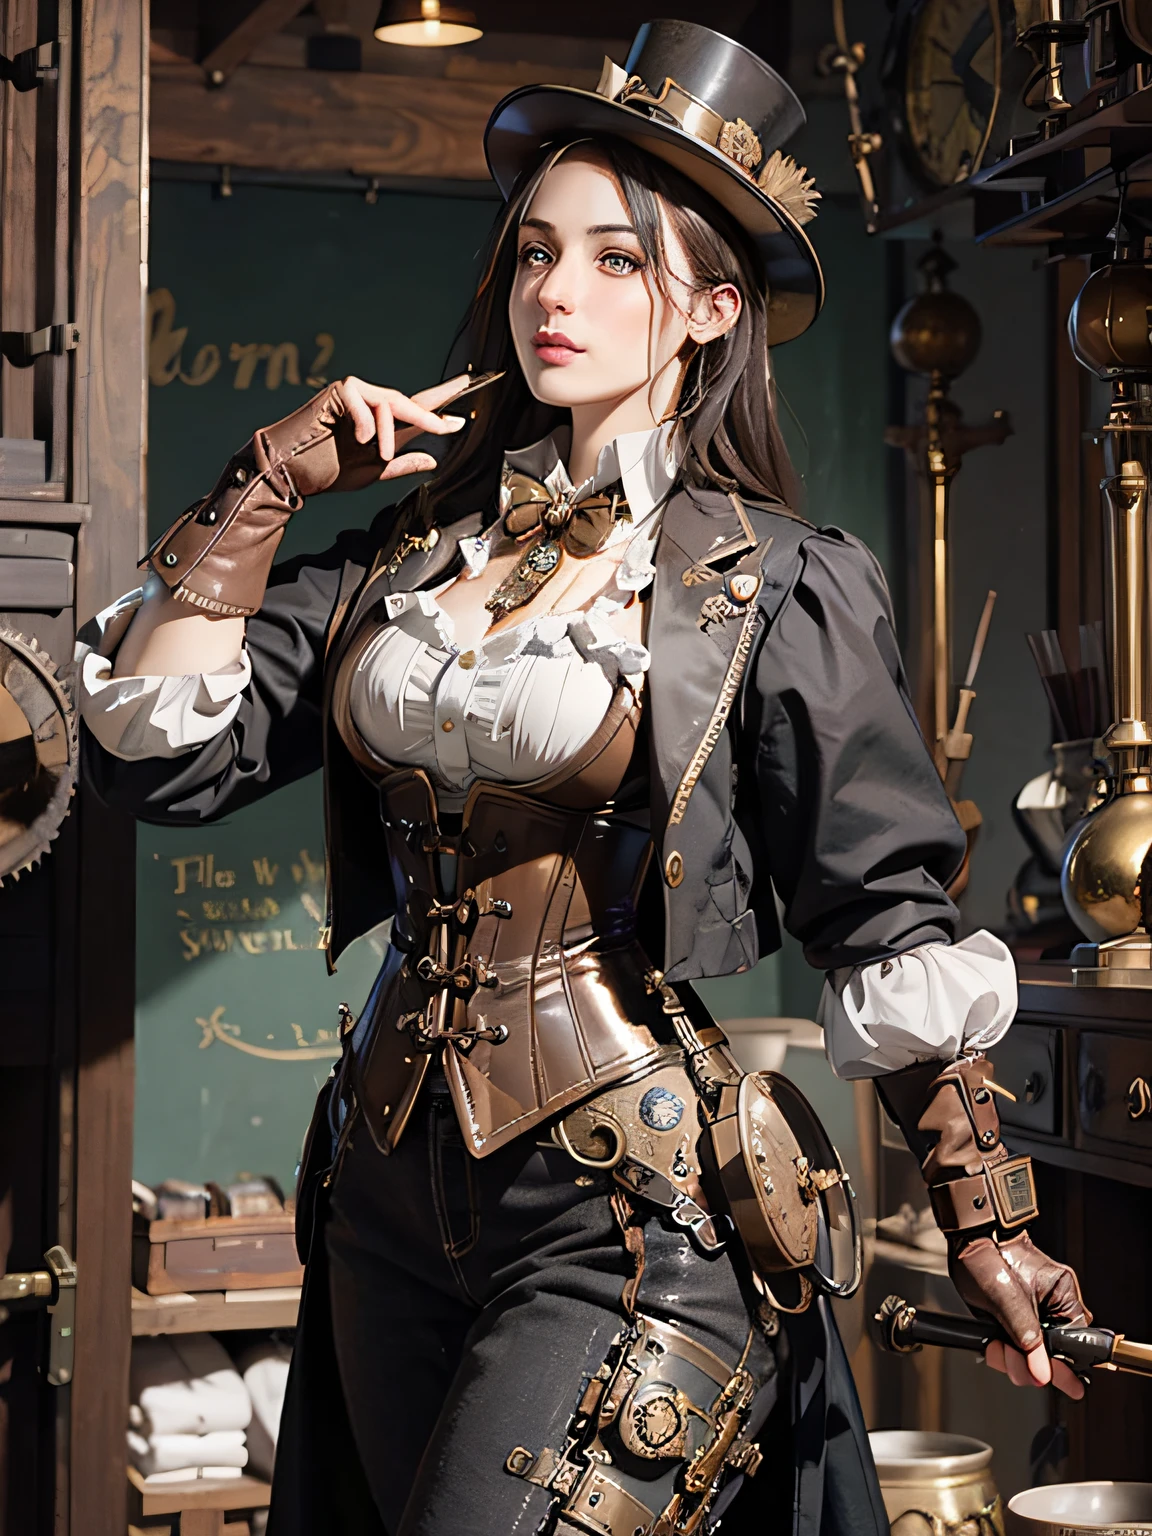 (Victorian steampunk theme,Victorian steampunk style),Extremely detailed, Best Quality, Ultra-realistic,hight resolution, Dynamic Angle, Dynamic Pose, (1girl in), Glass Goggles, Leather gloves, brass buttons, waistcoat, corsets, Top hat, Mechanical arm, Brass Watches, Complex clockwork, gear wheel, Steam engine, Vintage Machinery, Dirty and worn, Sepia tone.